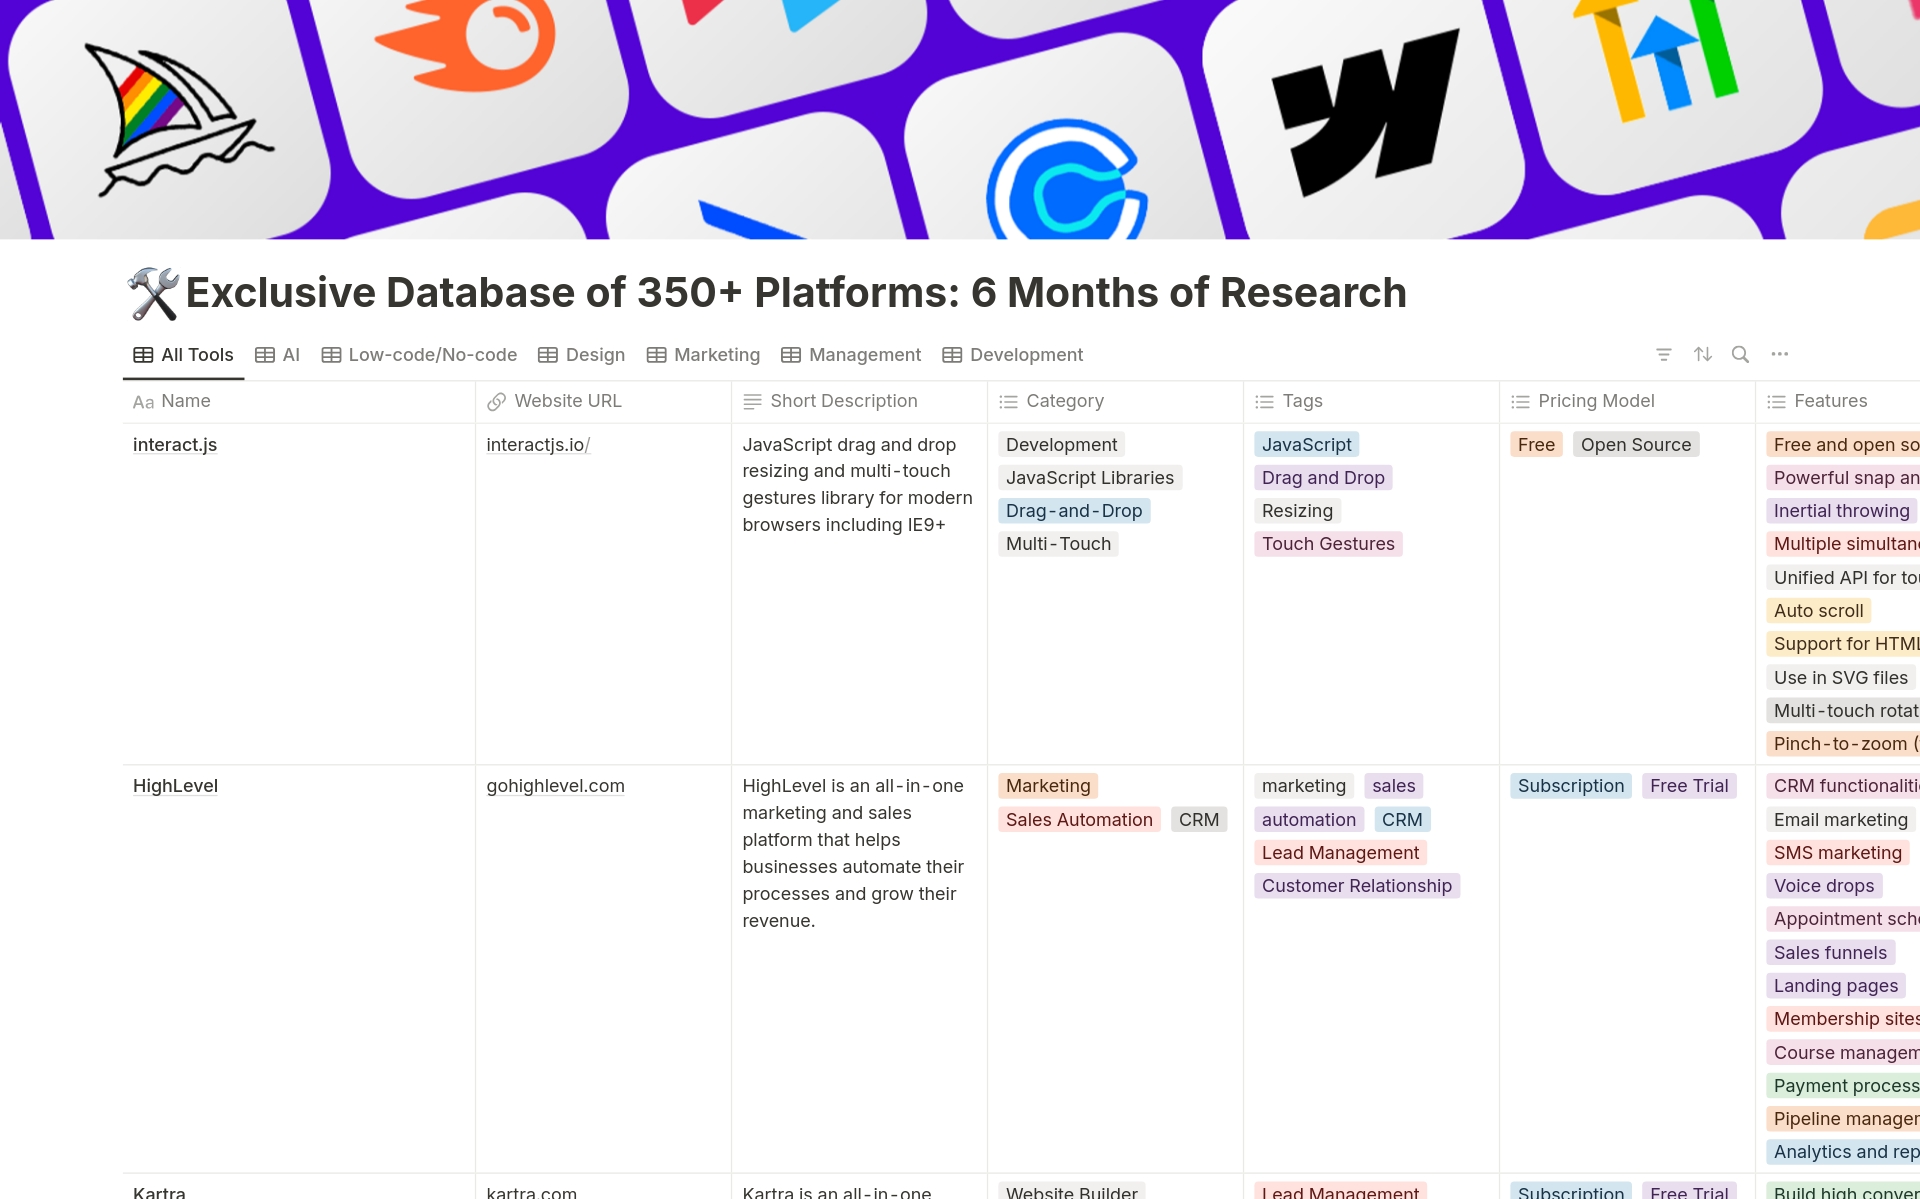 After 6 months of research and using these platforms in various projects, I've gathered an exclusive database of 350+ platforms that could be exactly what your project needs.